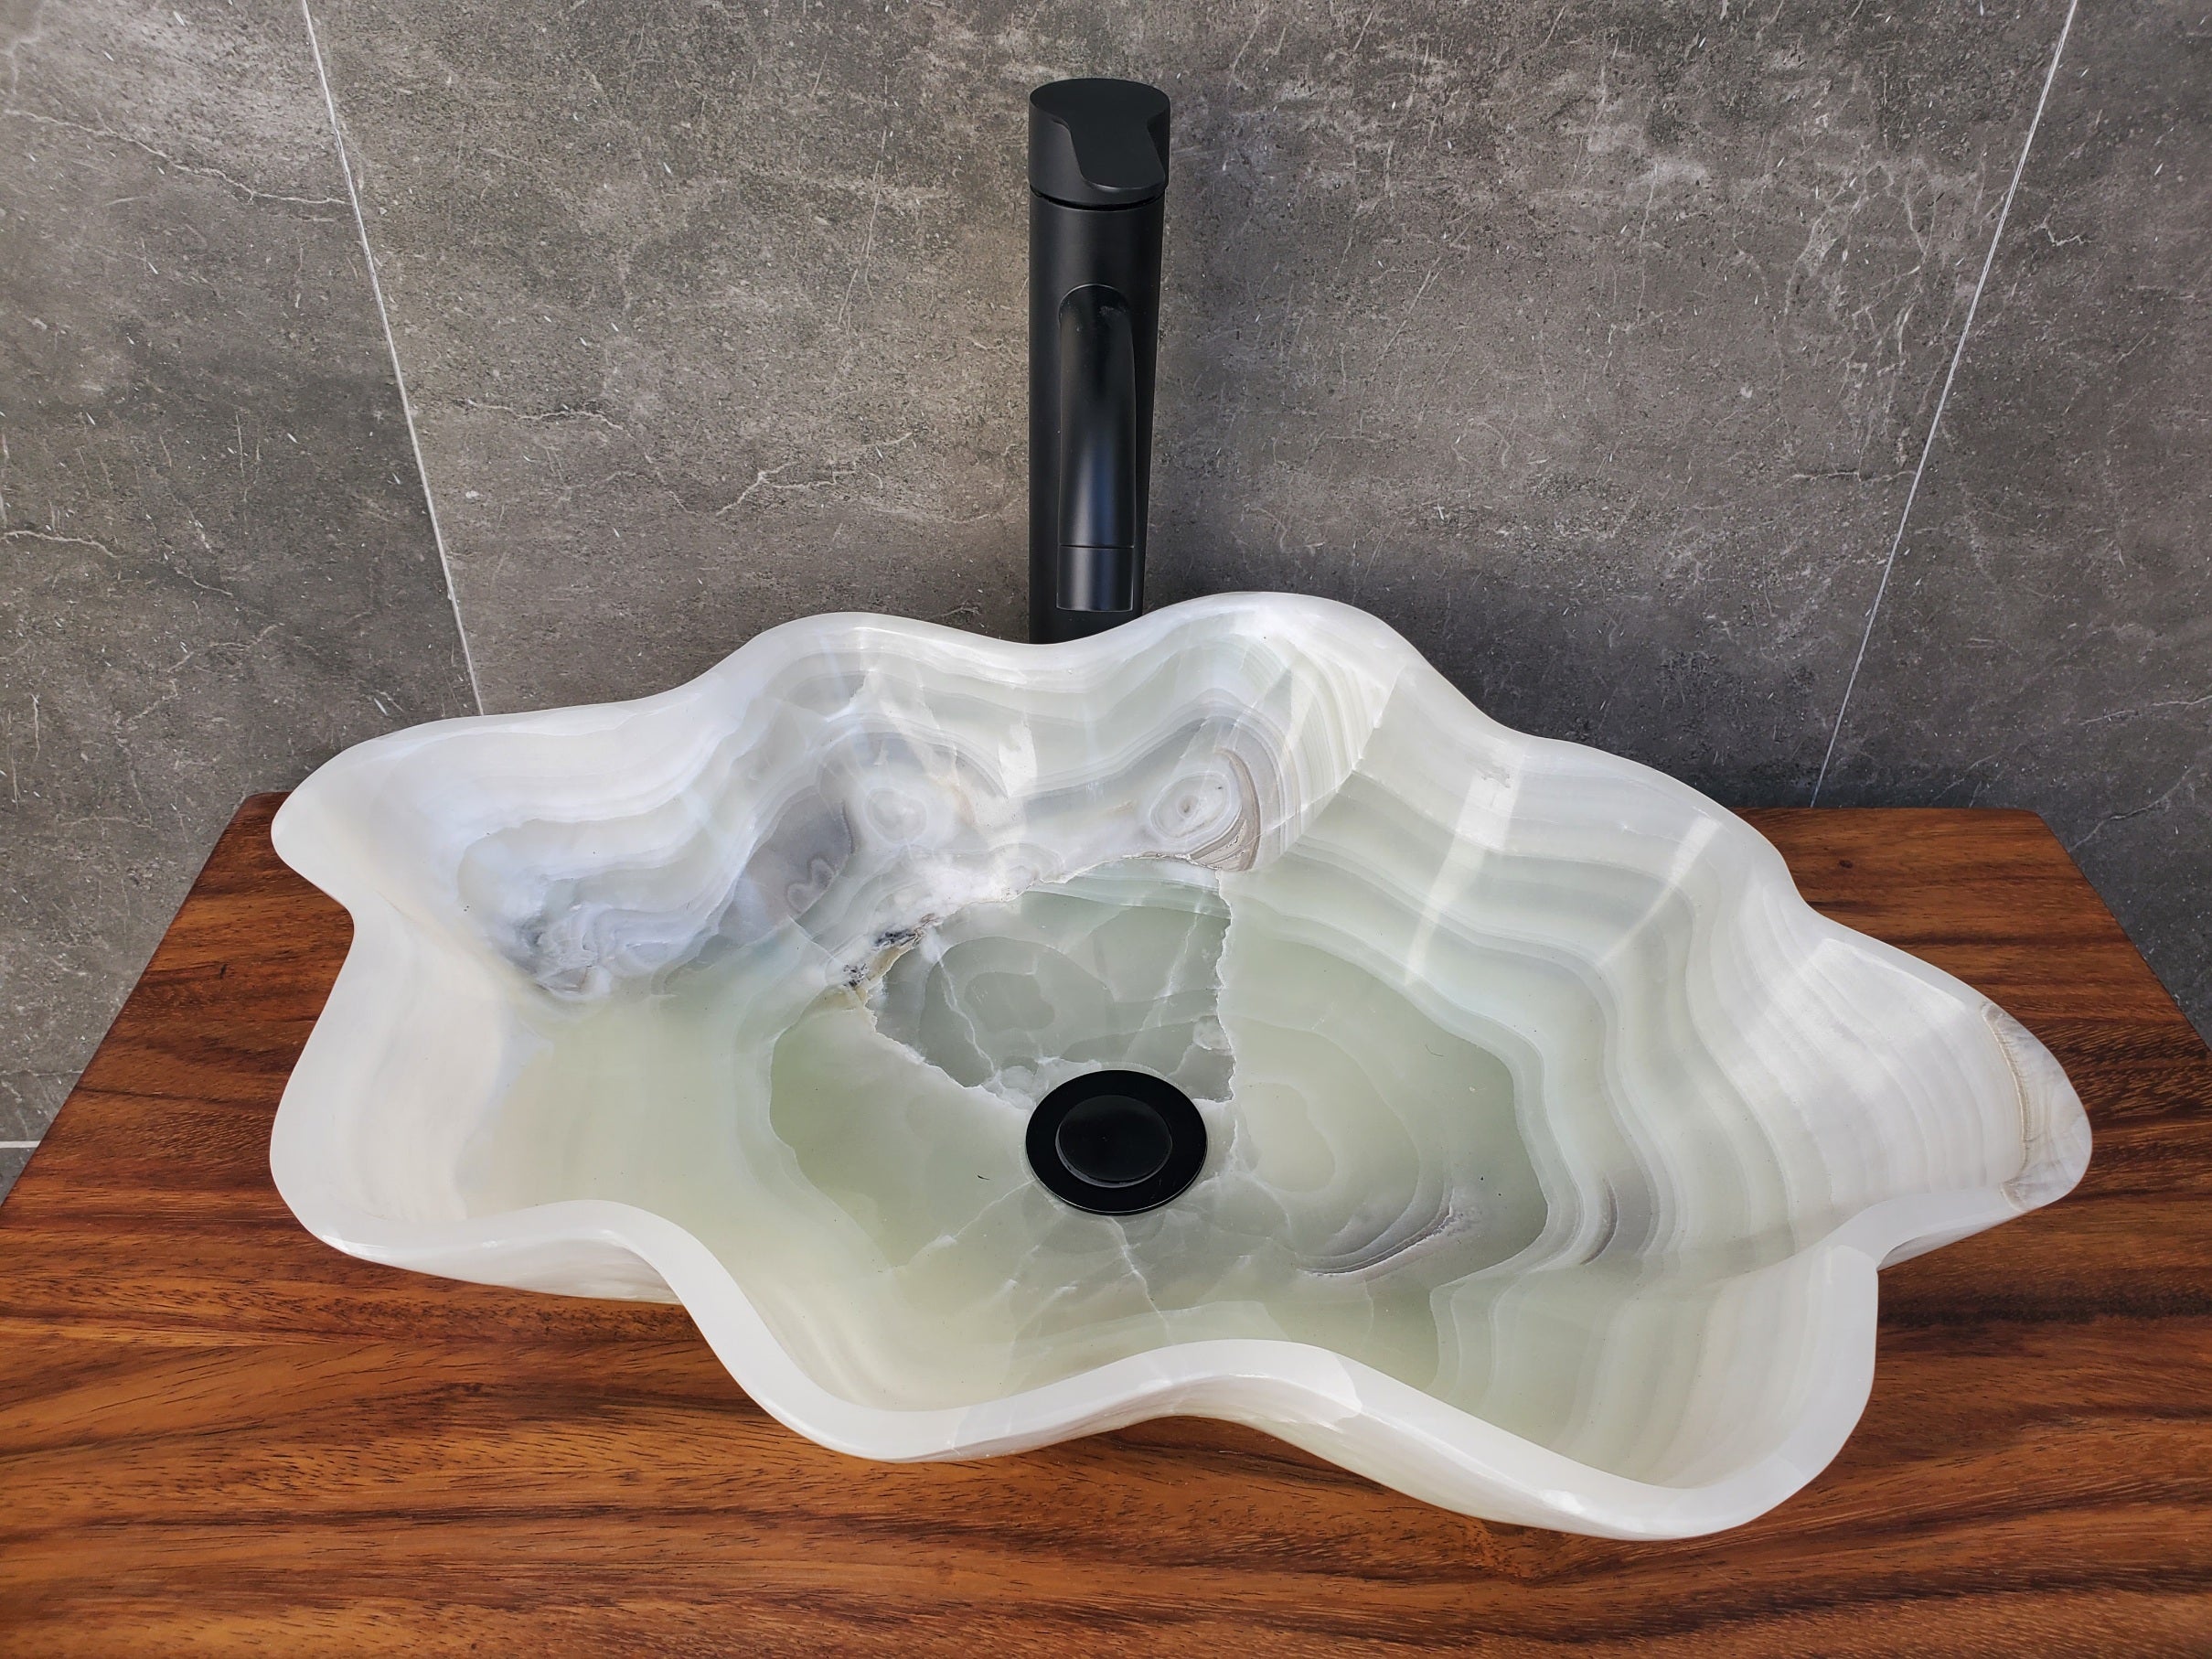 White Onyx Stone Bathroom Vessel Sink. Above counter sinks. High-polished Epoxy and Light Stone Sealant for the inner bowl are available. Hand finished. Made in Mexico. Hand Finished in USA. Buy Now at www.felipeandgrace.com